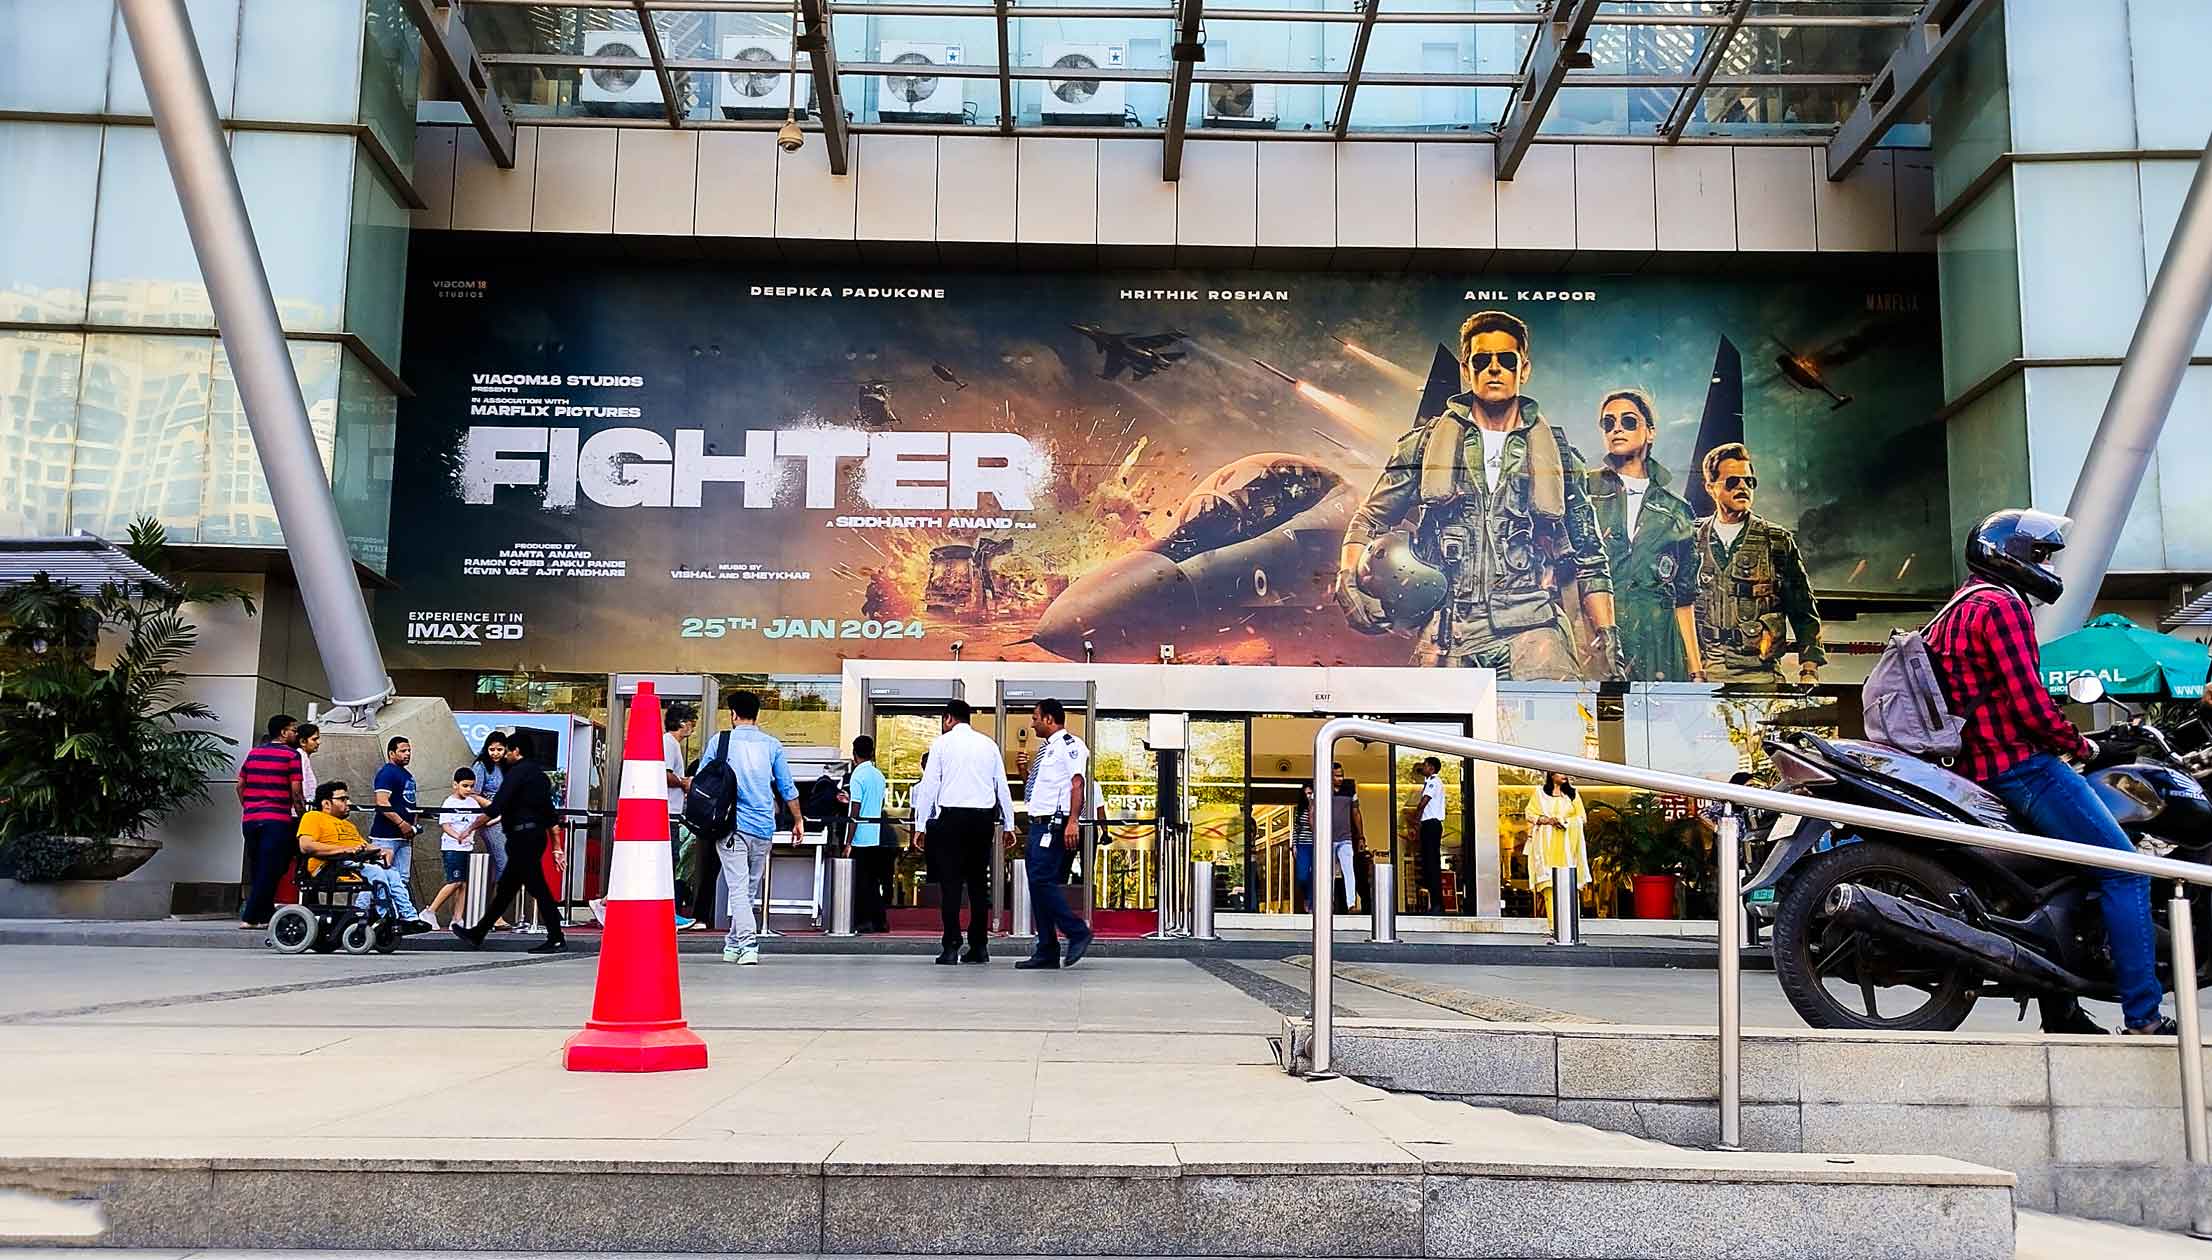 FIGHTER movie campaign at mall